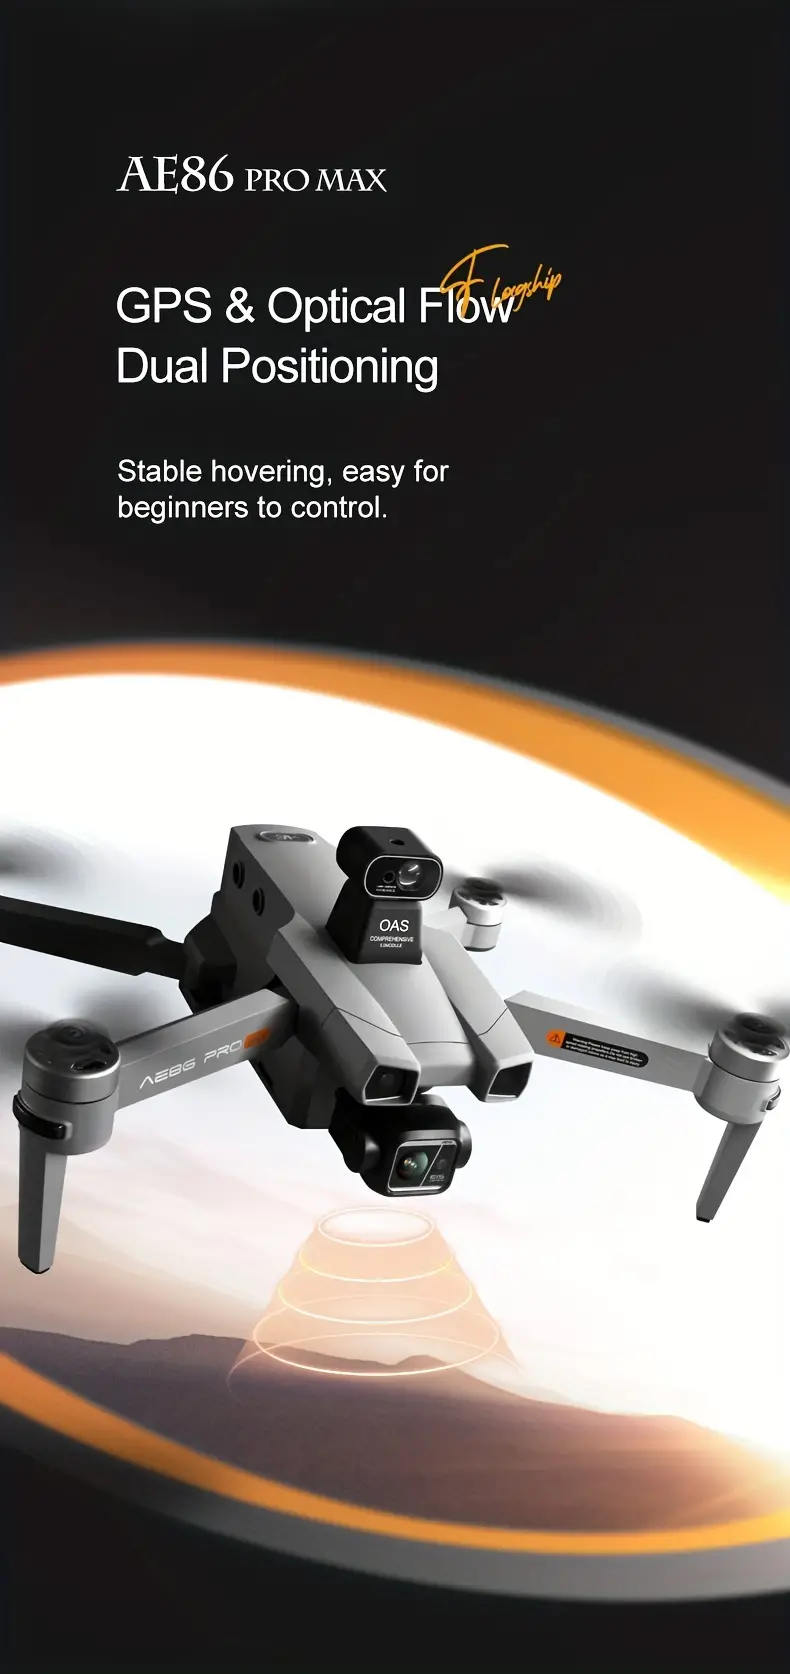 ae86 pro max professional drone 5g brushless motor gps positioning three axis gimbal optical flow positioning intelligent obstacle avoidance dual hd camera long range remote control quadcopter details 13